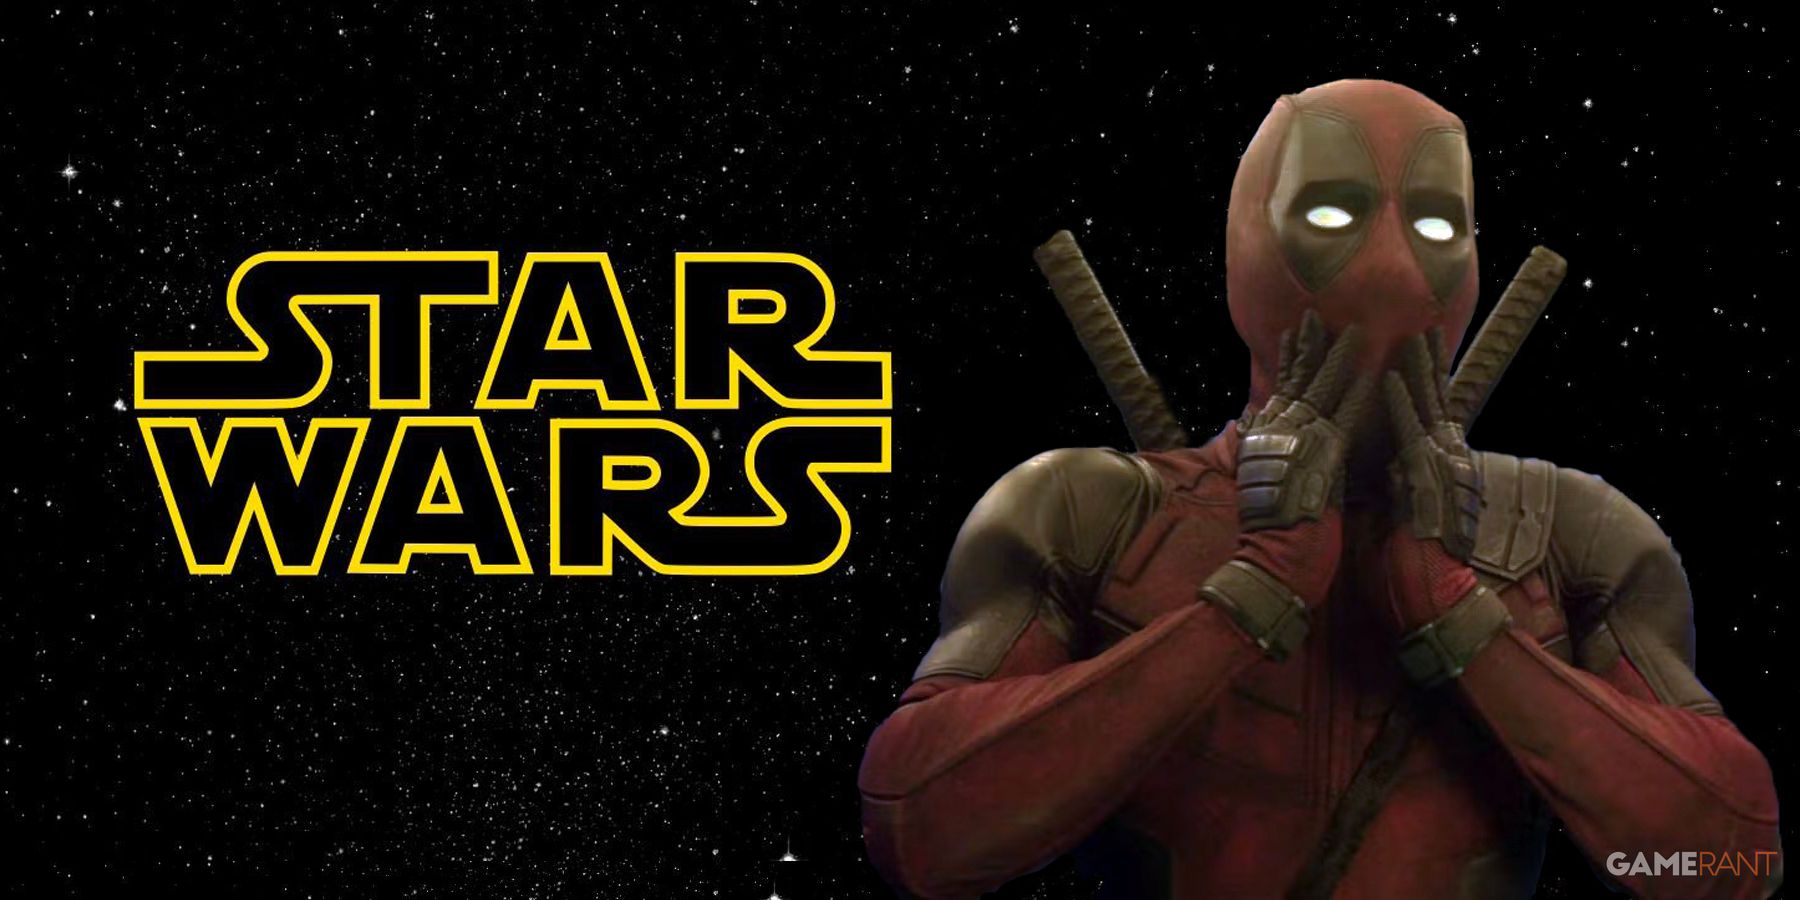 Deadpool 3' director says a key scene in film is inspired by Star Wars